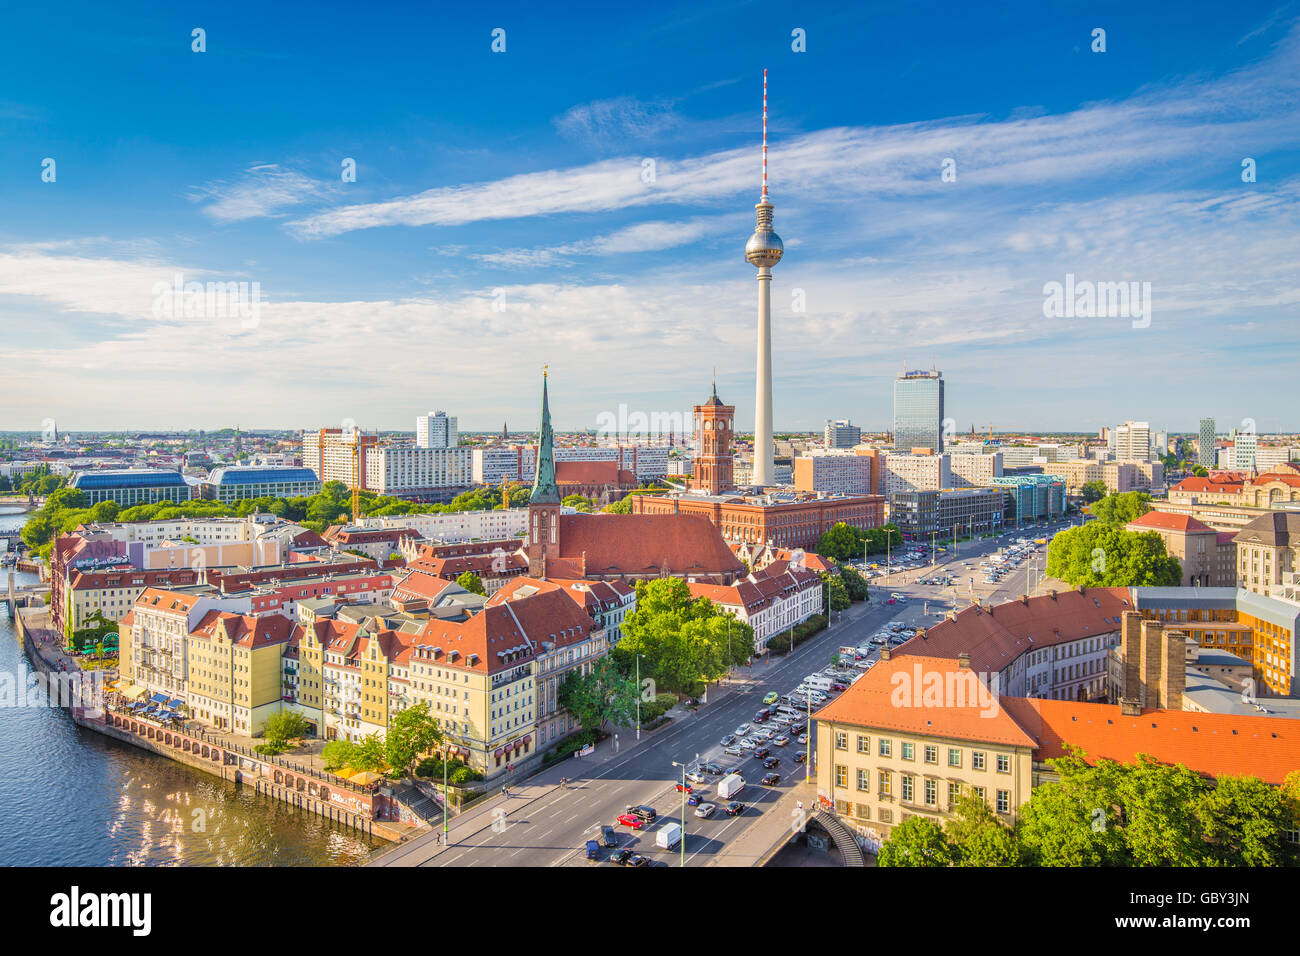 Aerial view of Berlin skyline with famous TV tower and Spree river in beautiful evening light at sunset, Germany Stock Photo